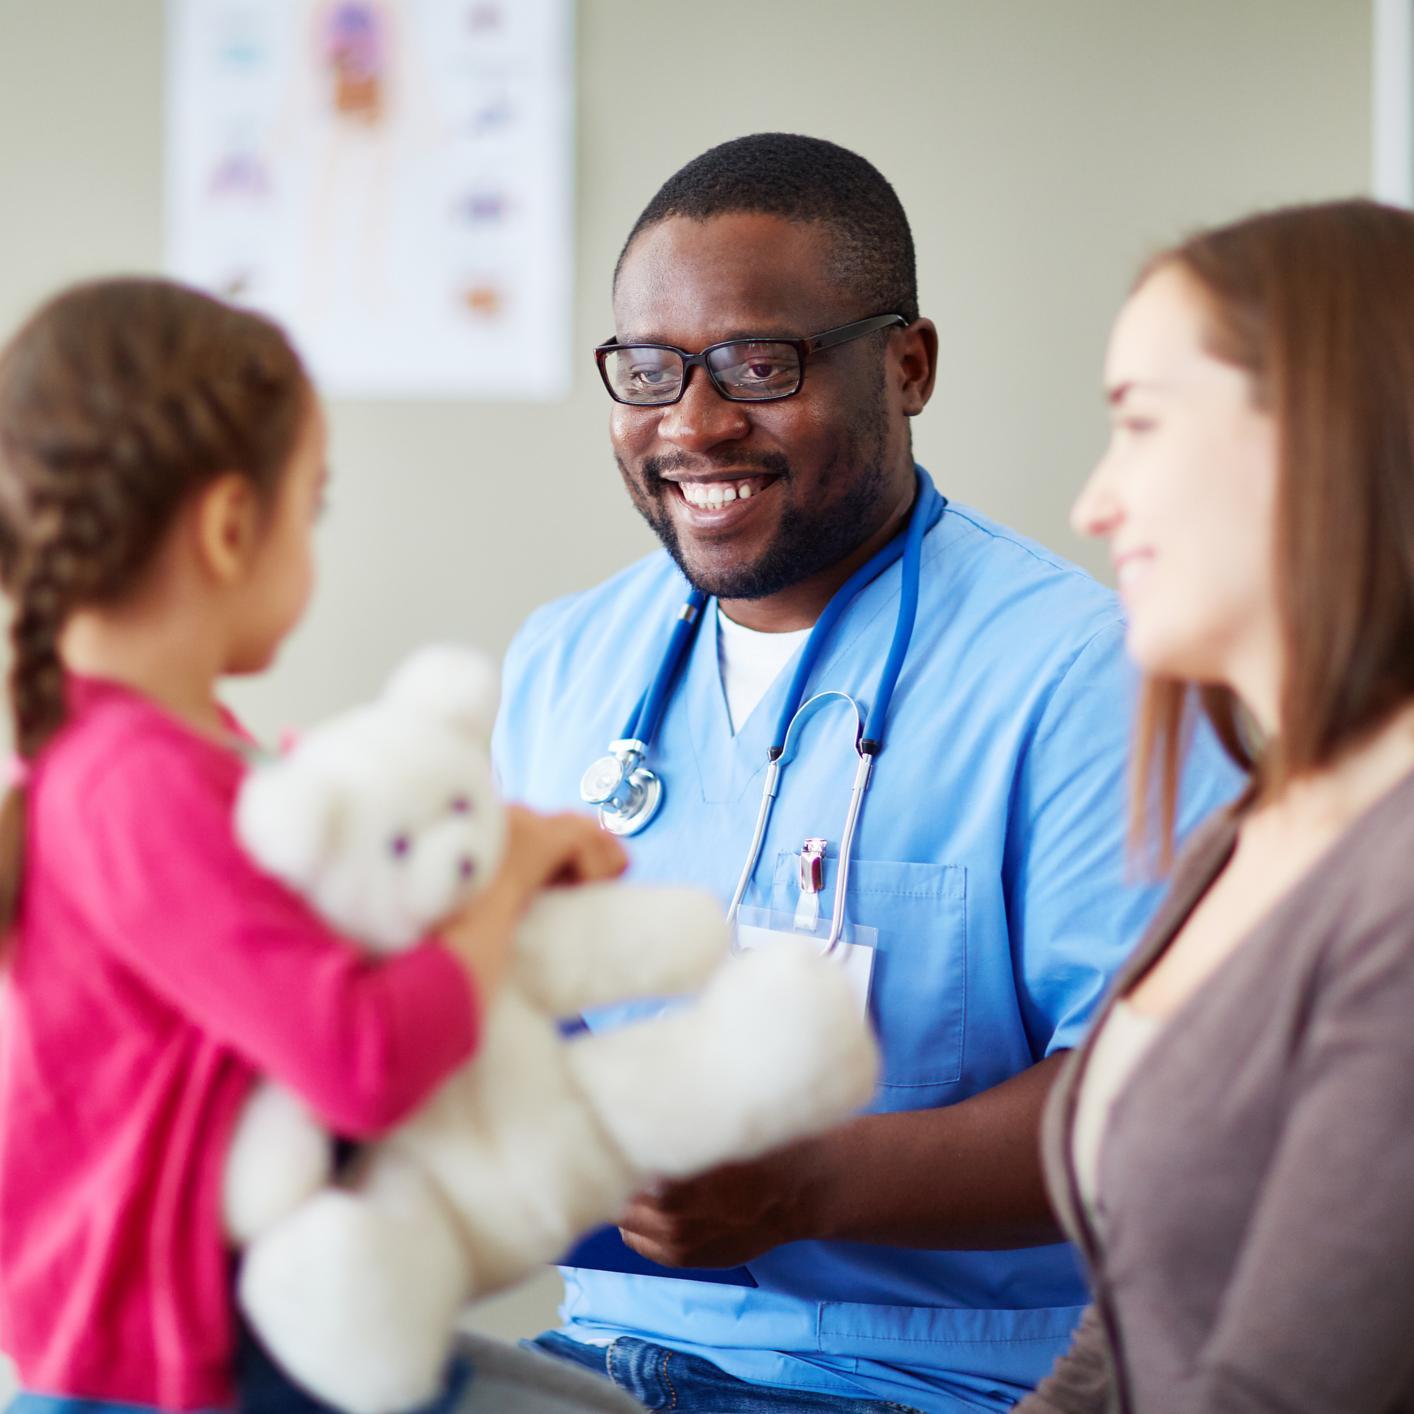 DEVELOPMENTAL SCREENING: Sharing Concerns about Your Child’s Development With Your Doctor